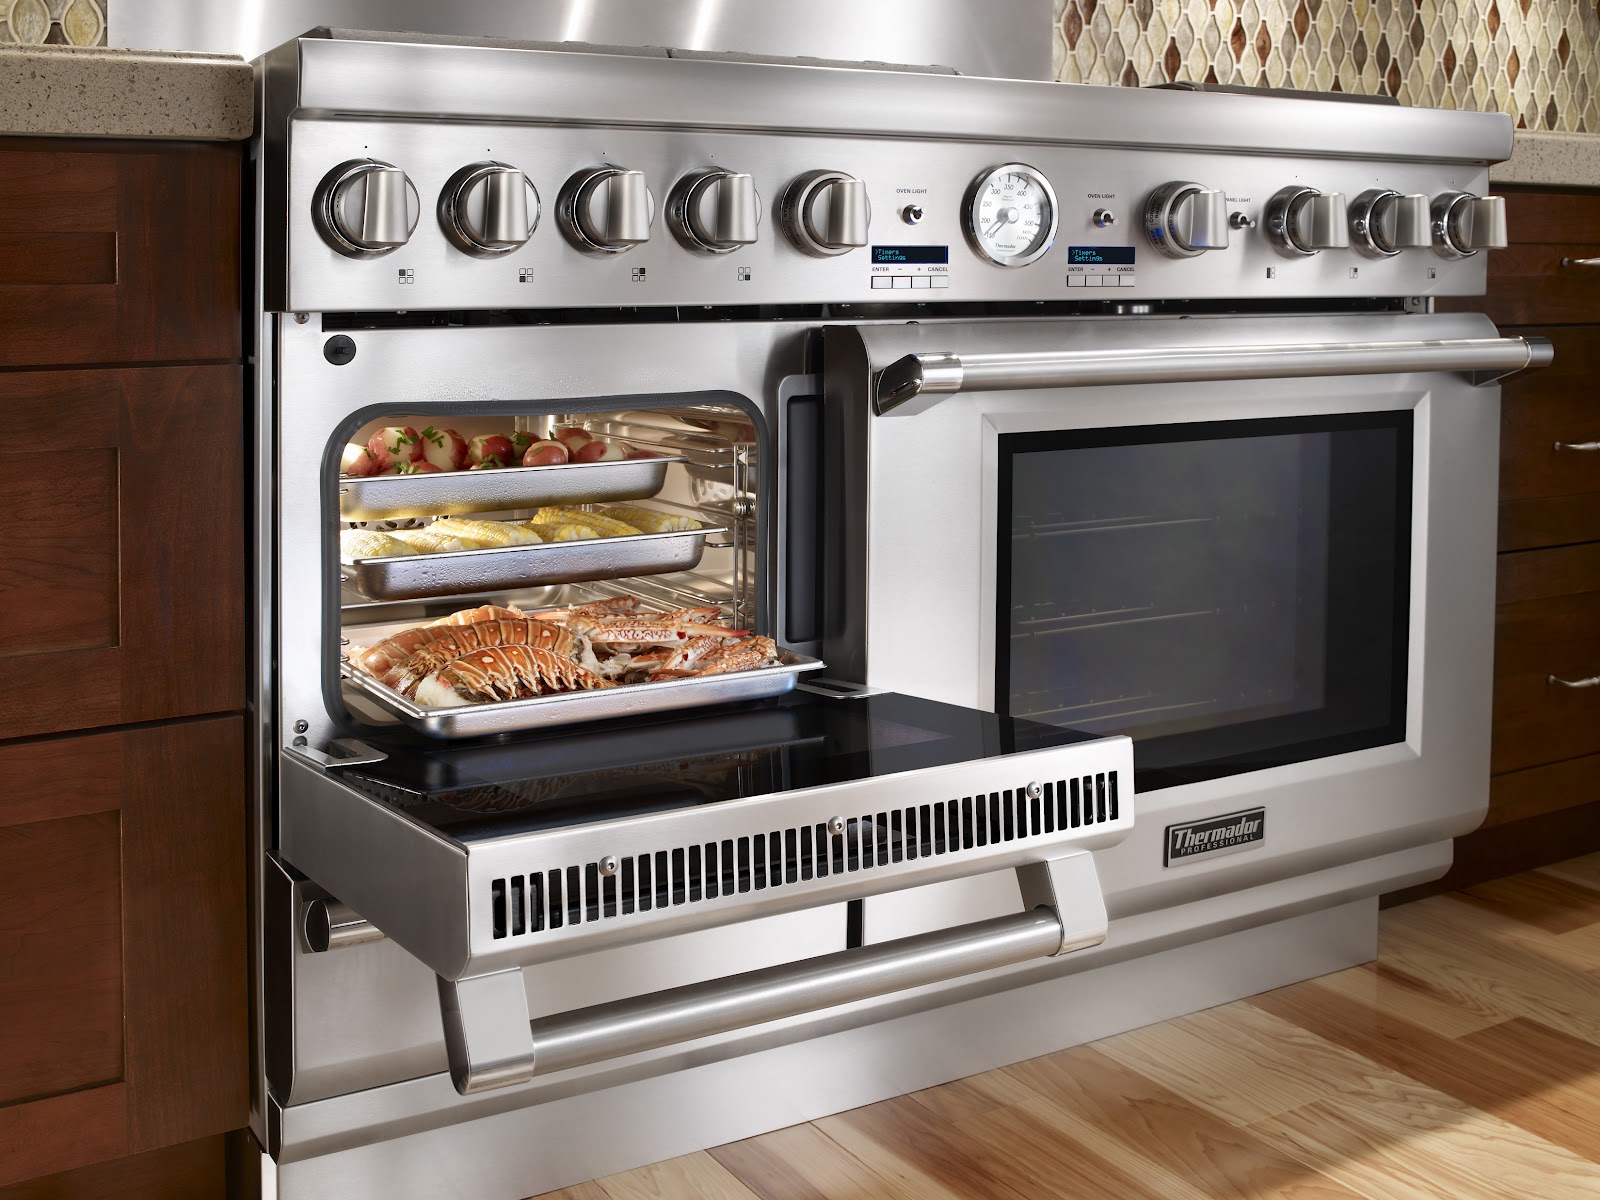 Pro Grand Steam Oven Open From Thermadore Kitchen Equipment1 